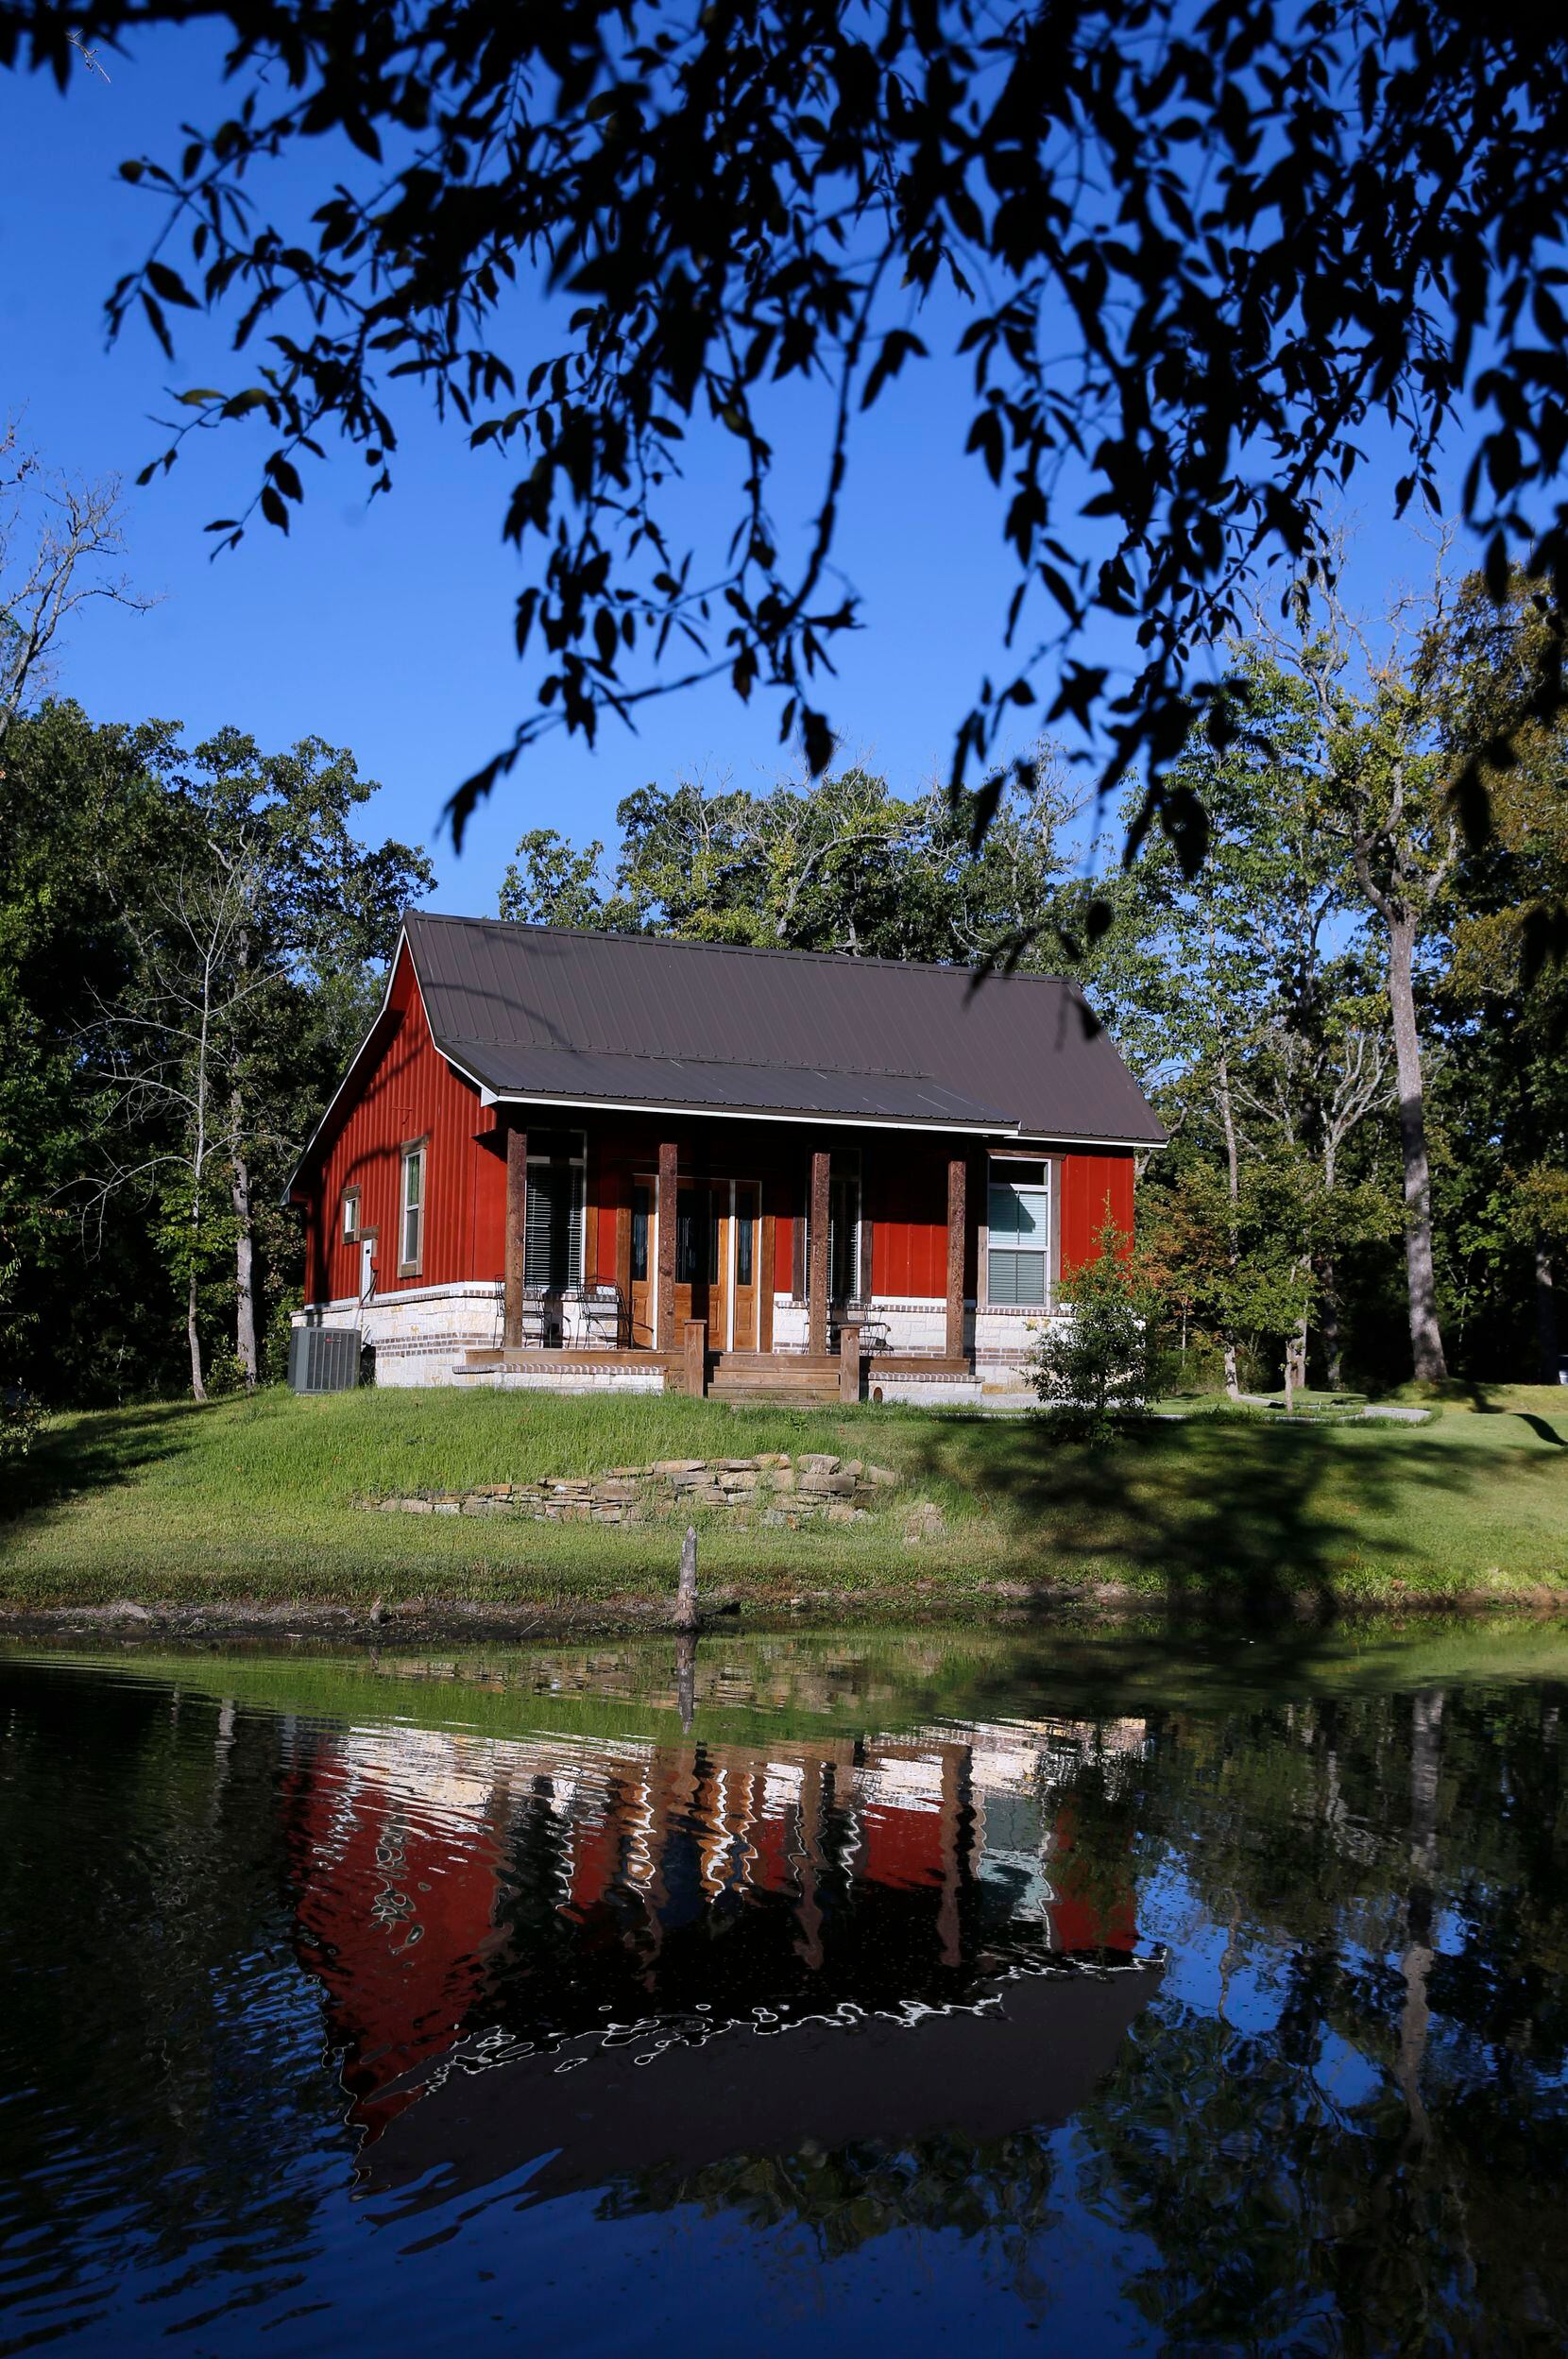 The Texan House is one of four options at the Cabins on Bearpen Creek in Royse City.